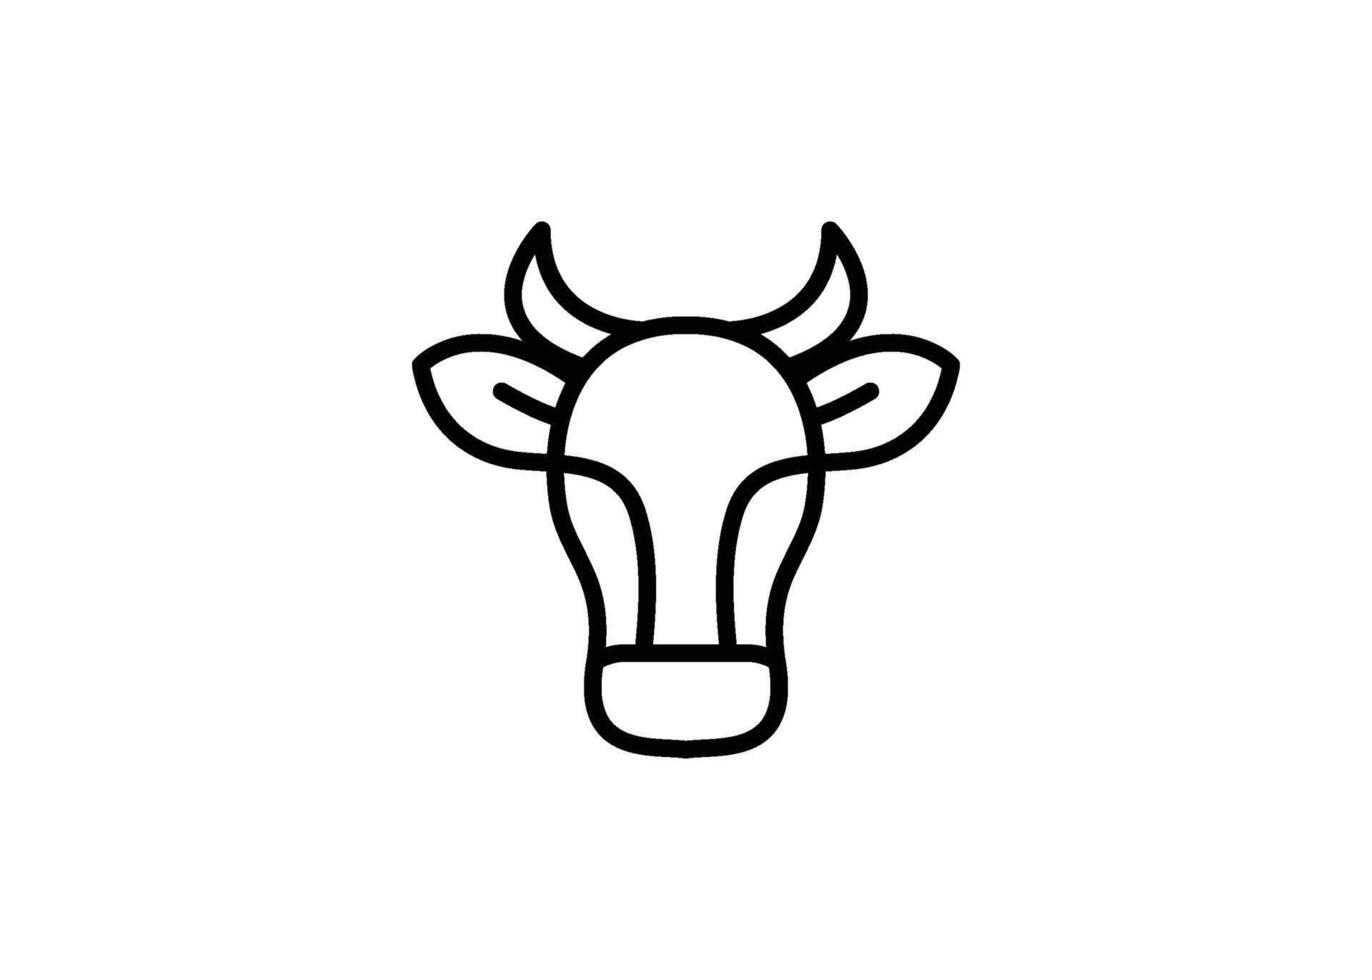 Cow head icon line design template isolated vector